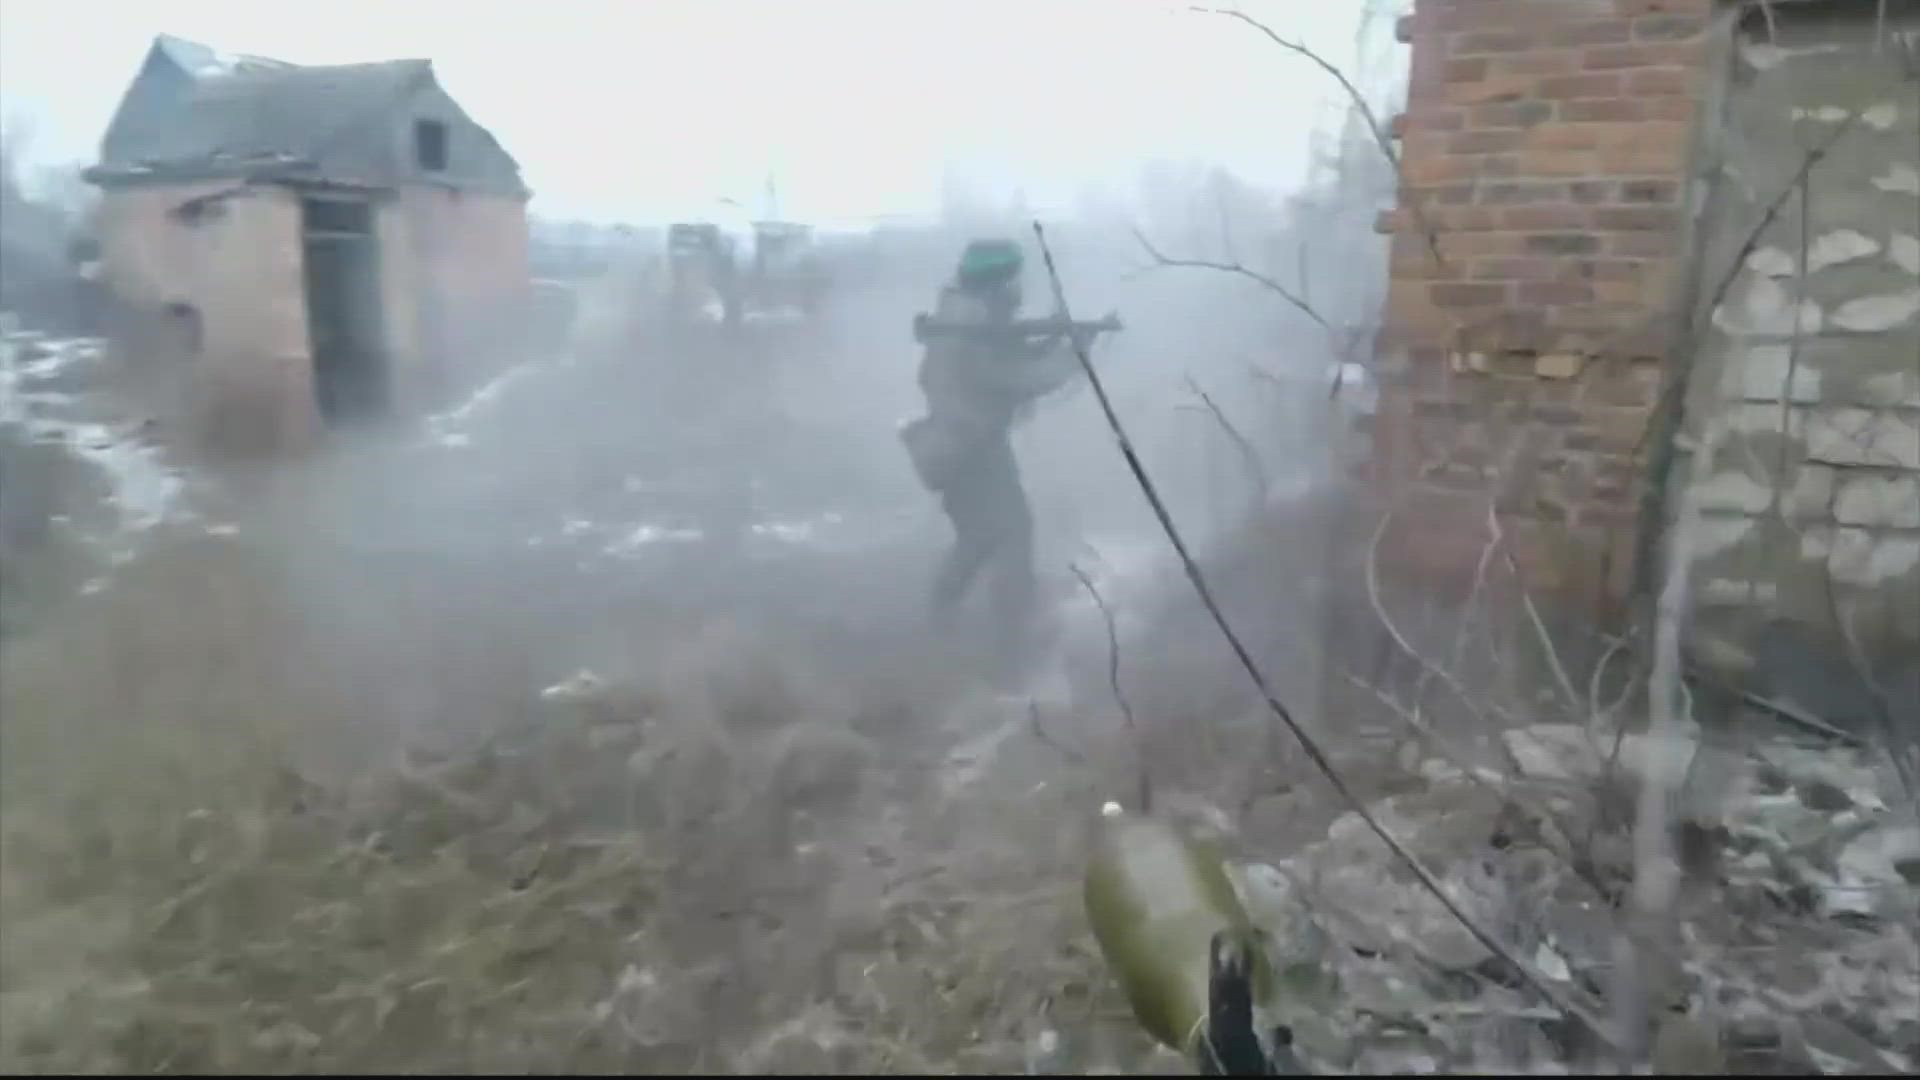 Ukrainian forces may be forced to abandon Bakhmut as Russian forces escalate their offensive in the key eastern city.